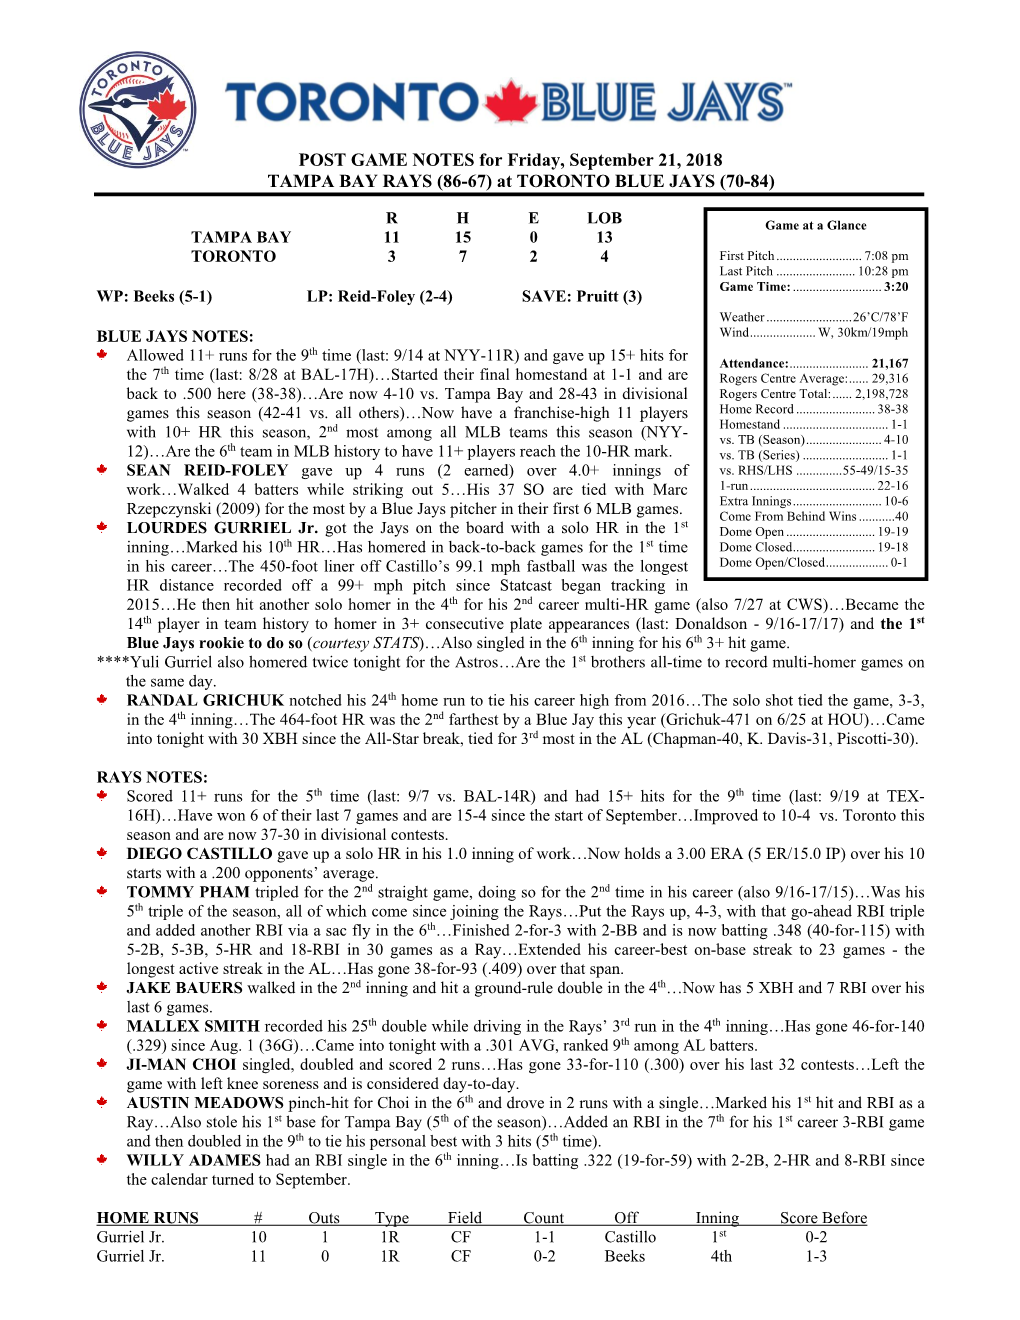 Post Game Notes for April 1, 1998